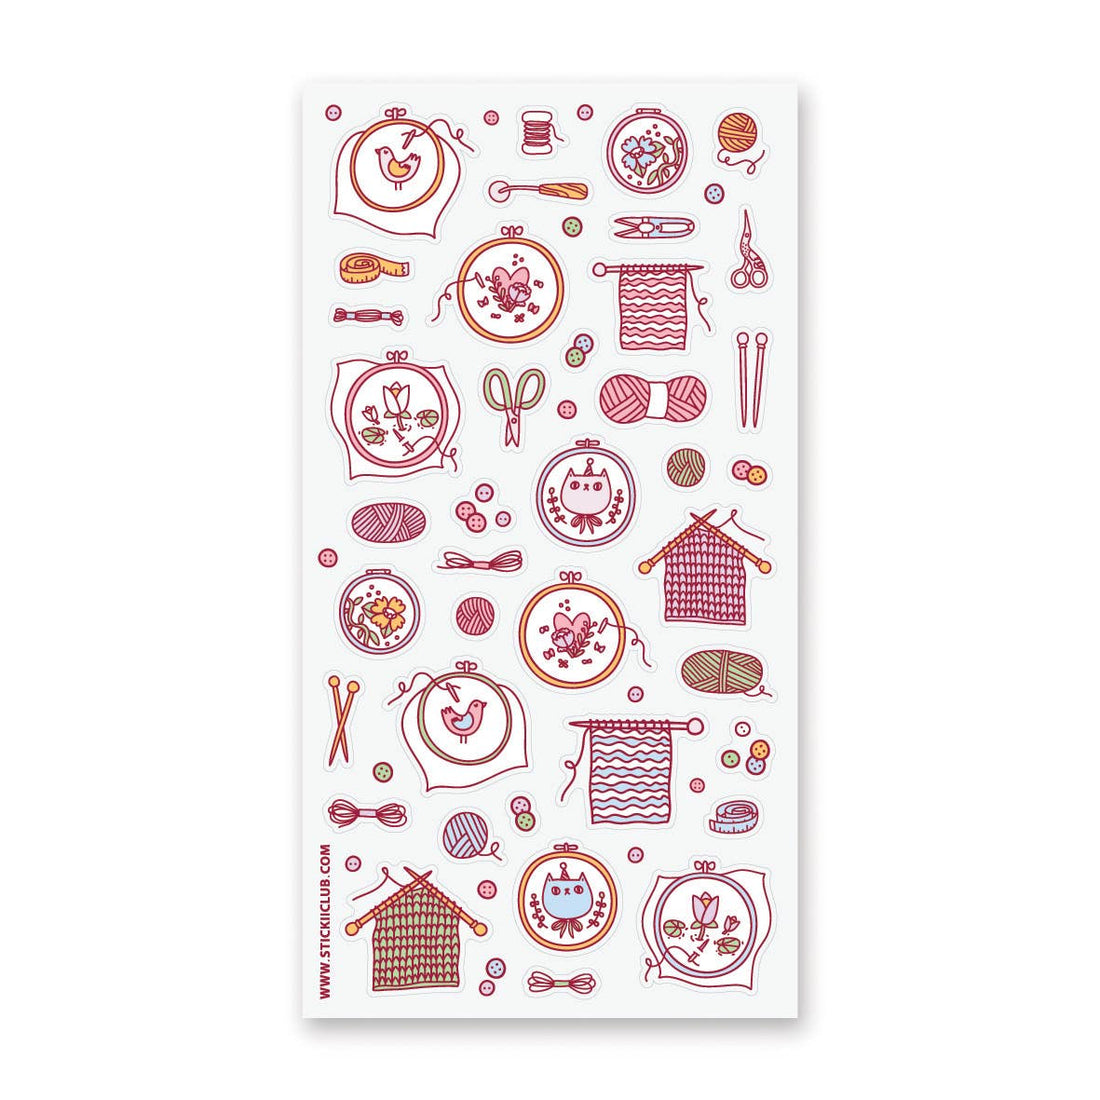 Knitting and Embroidery Stickers